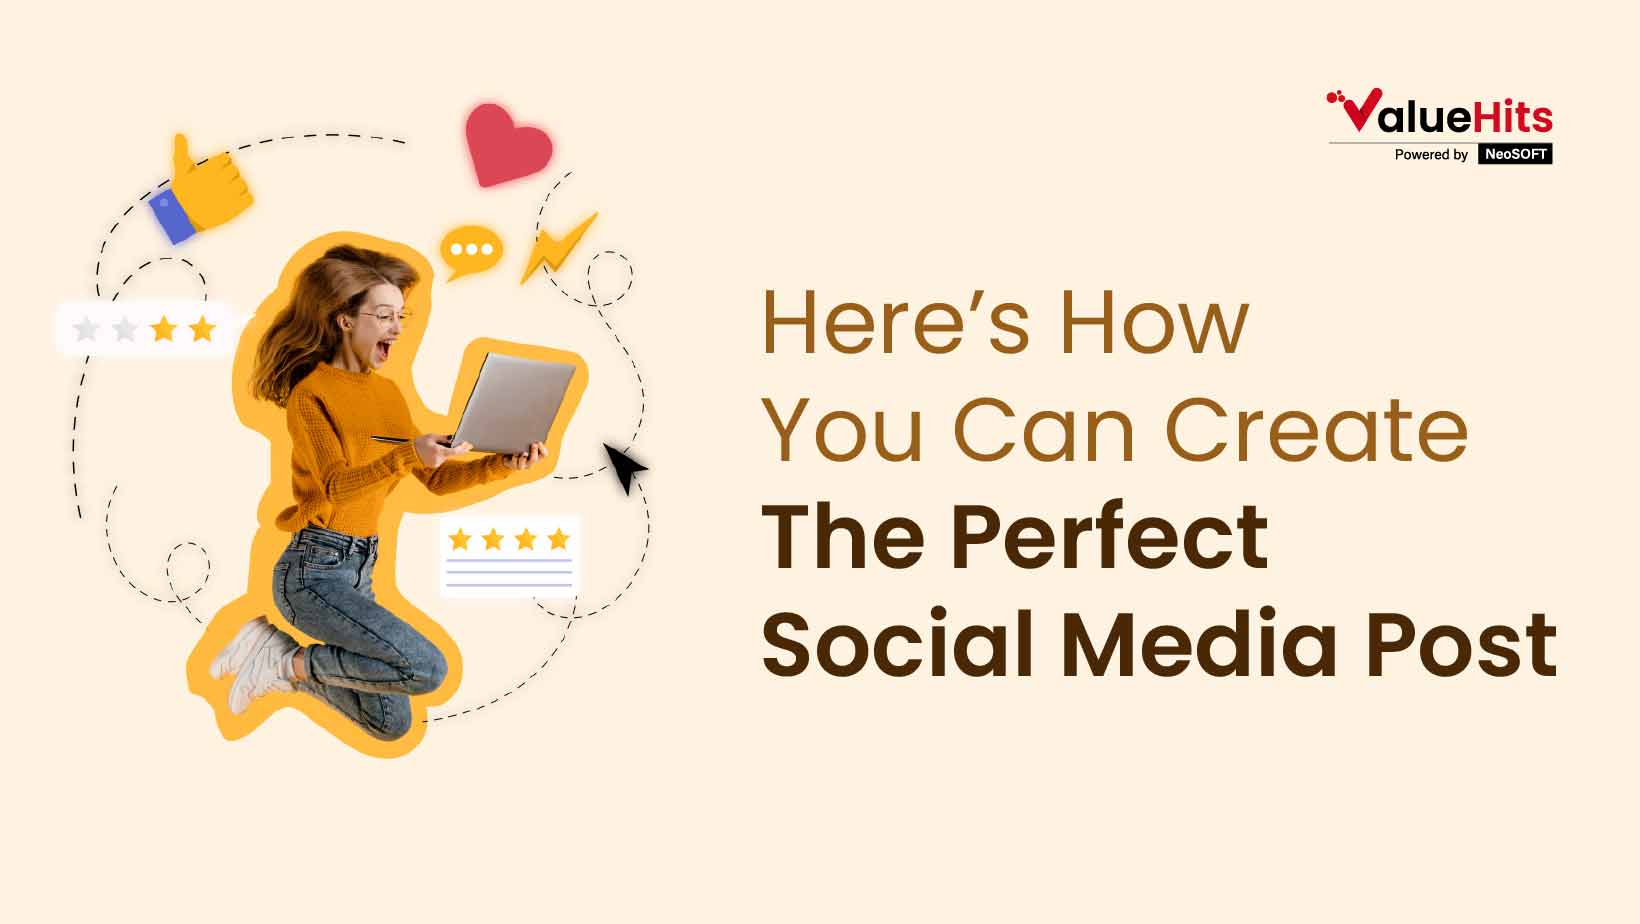 Here’s How You Can Create The Perfect Social Media Post